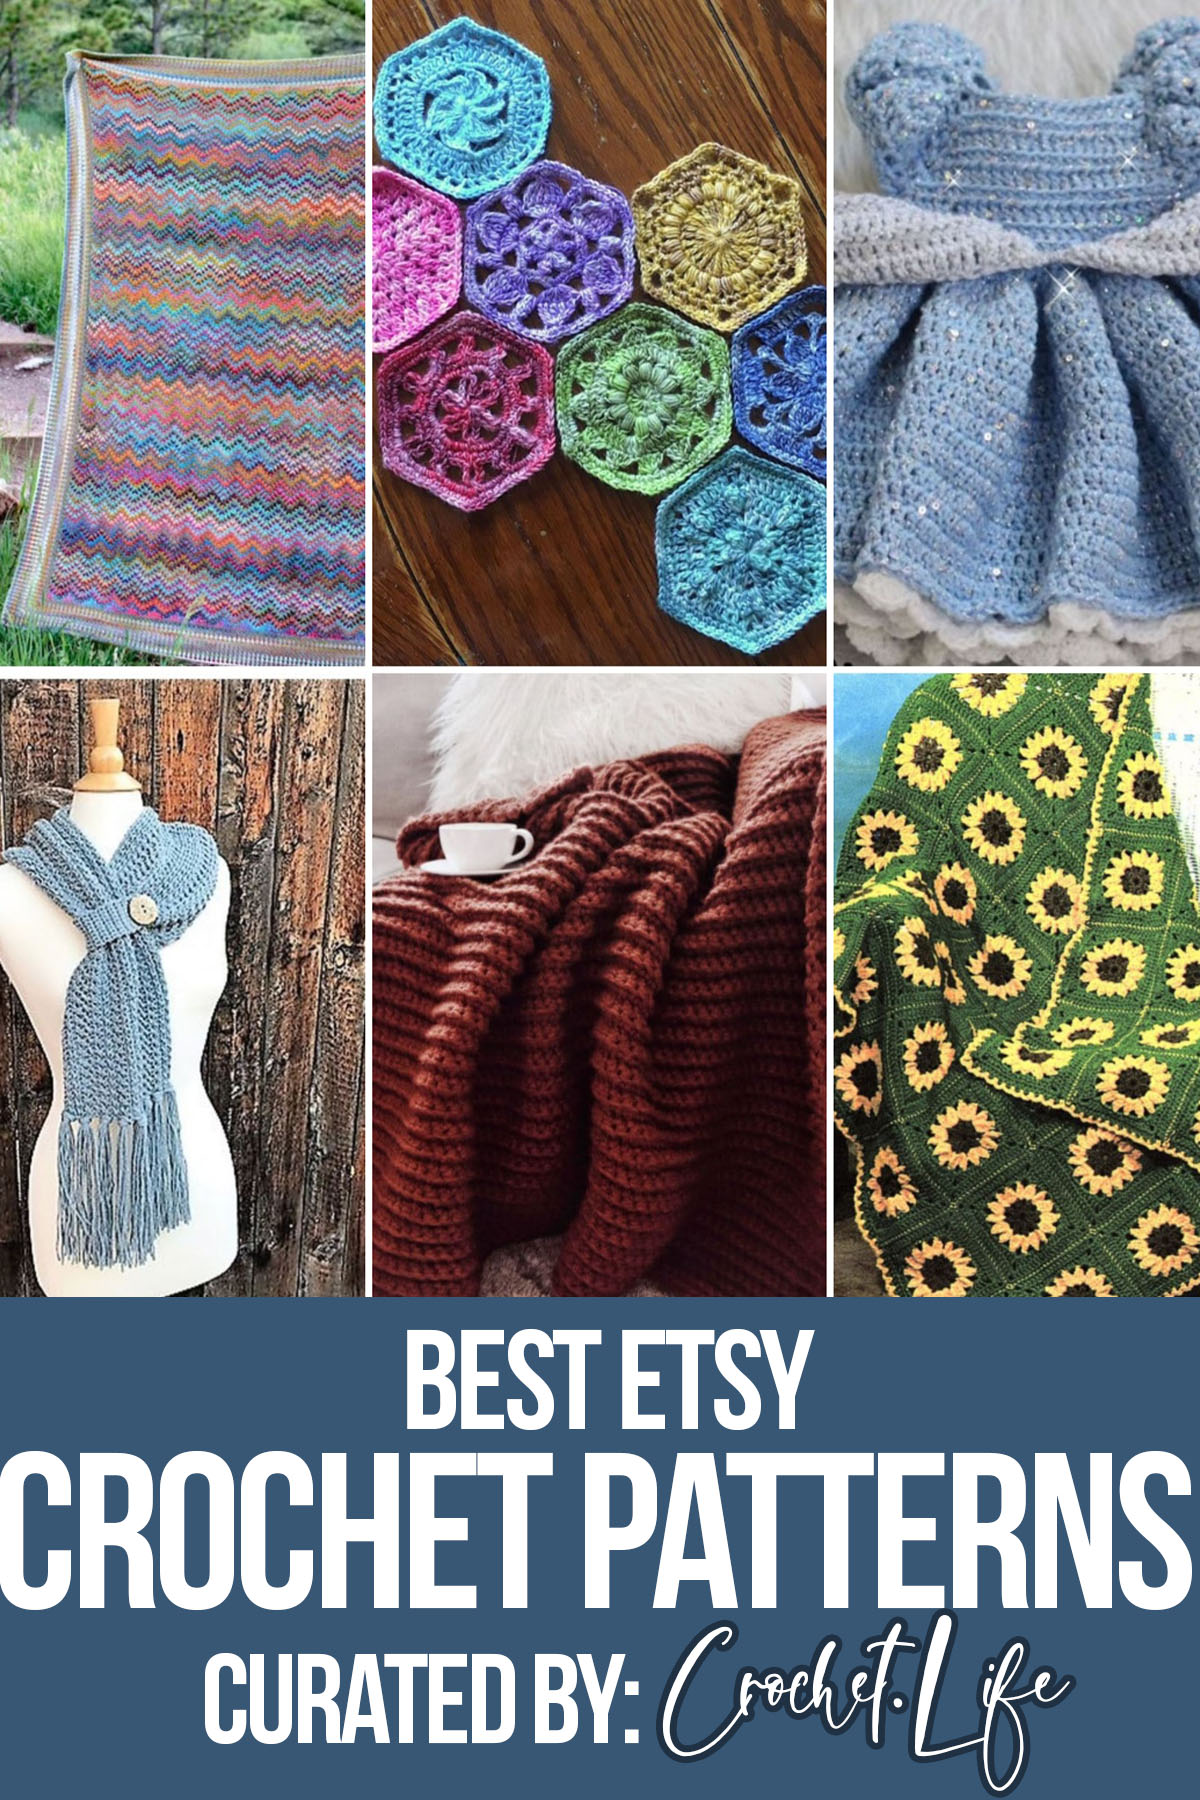 photo collage of crochet etsy patterns with text which reads best etsy crochet patterns curated by crochet.life